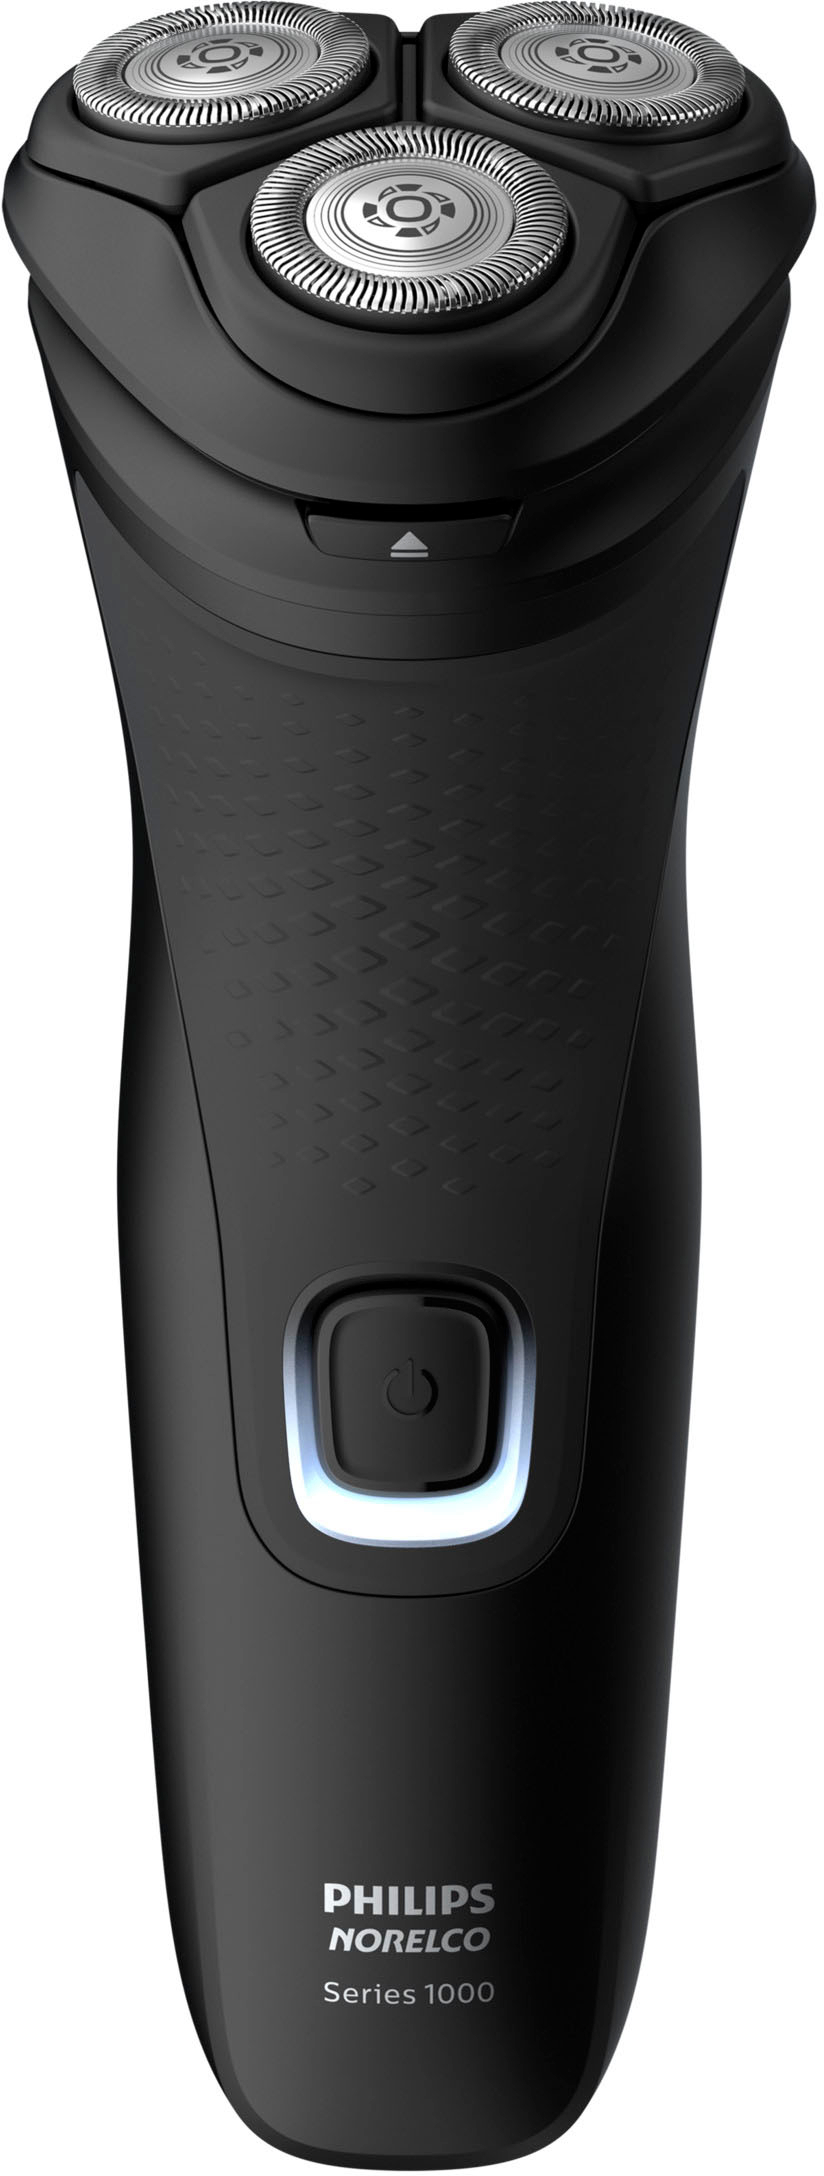 Angle View: Philips Norelco Shaver 1100 - Deep Black